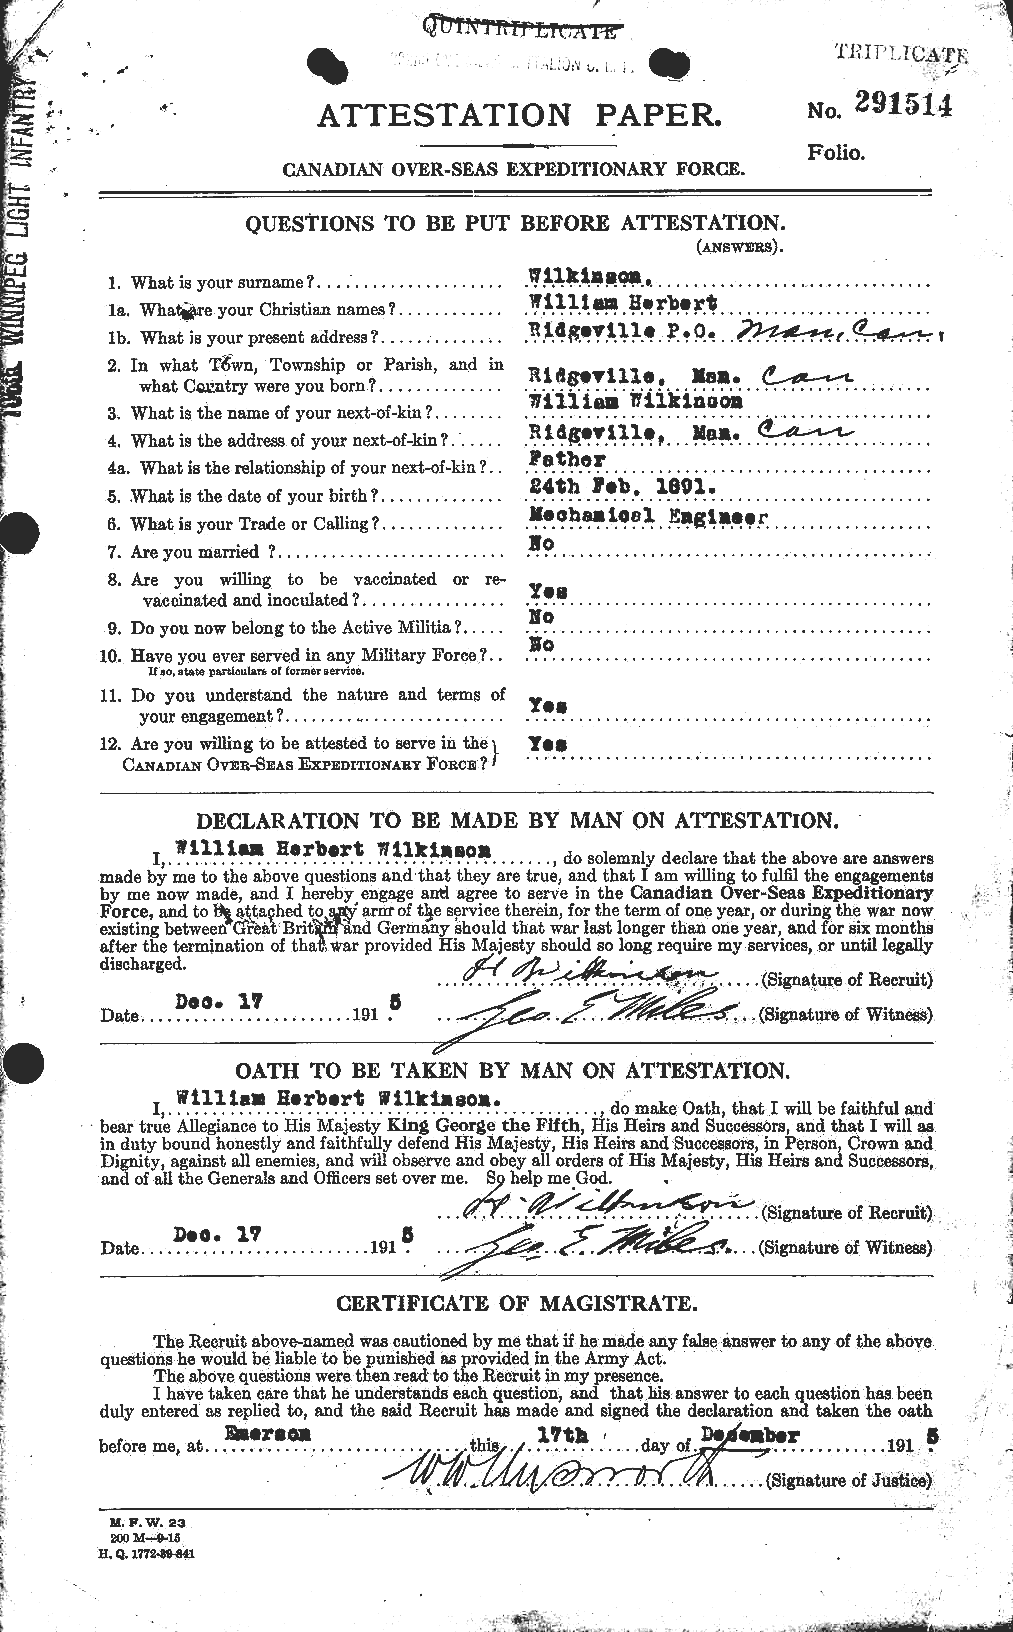 Personnel Records of the First World War - CEF 675088a